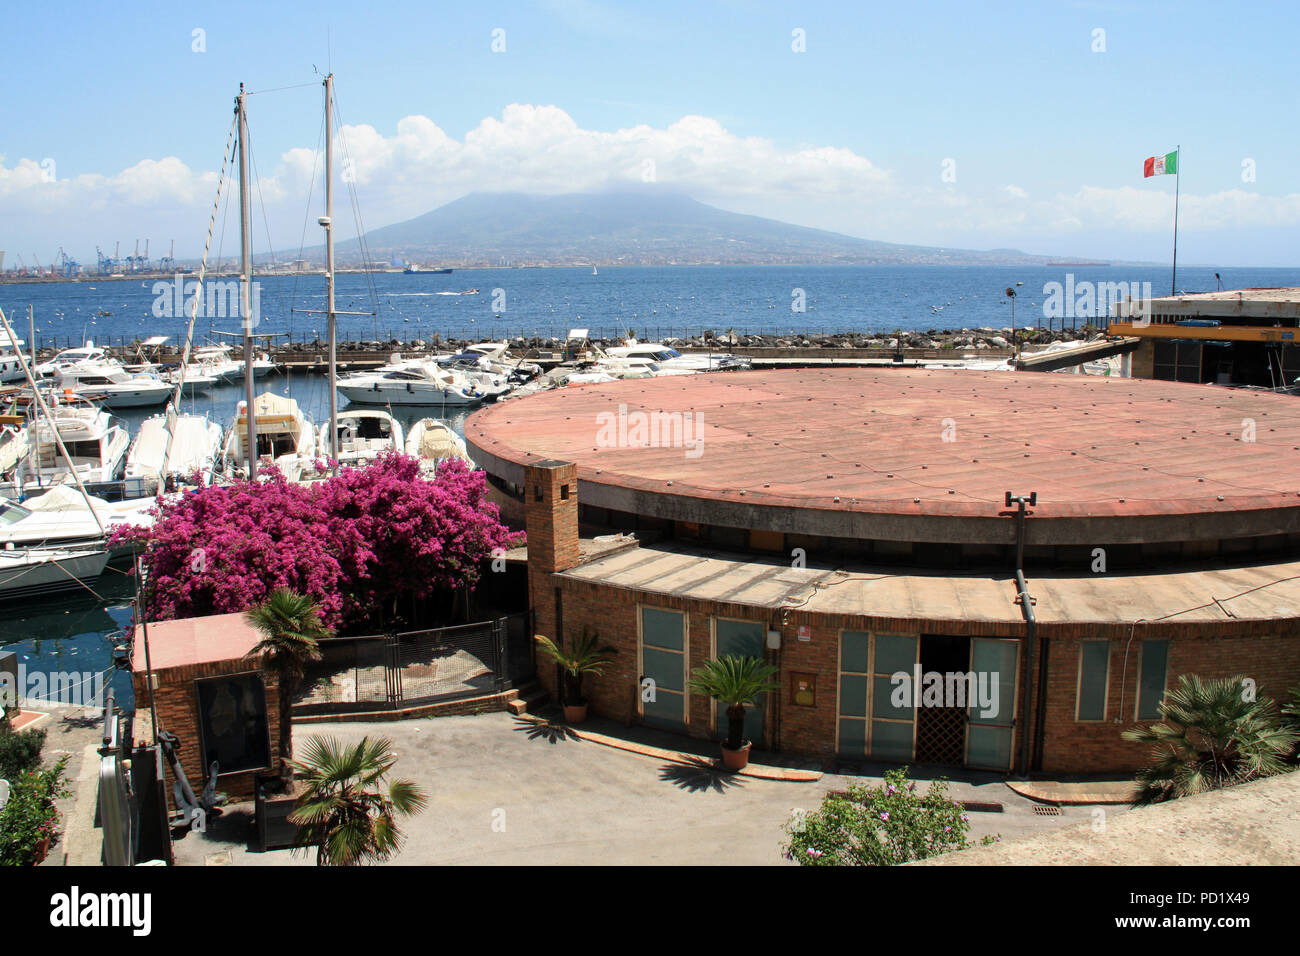 Recreational boats moored in a marina near the Castel dell'Ovo in Napoli, Italy, with the Mount Vesuvius in the background Stock Photo